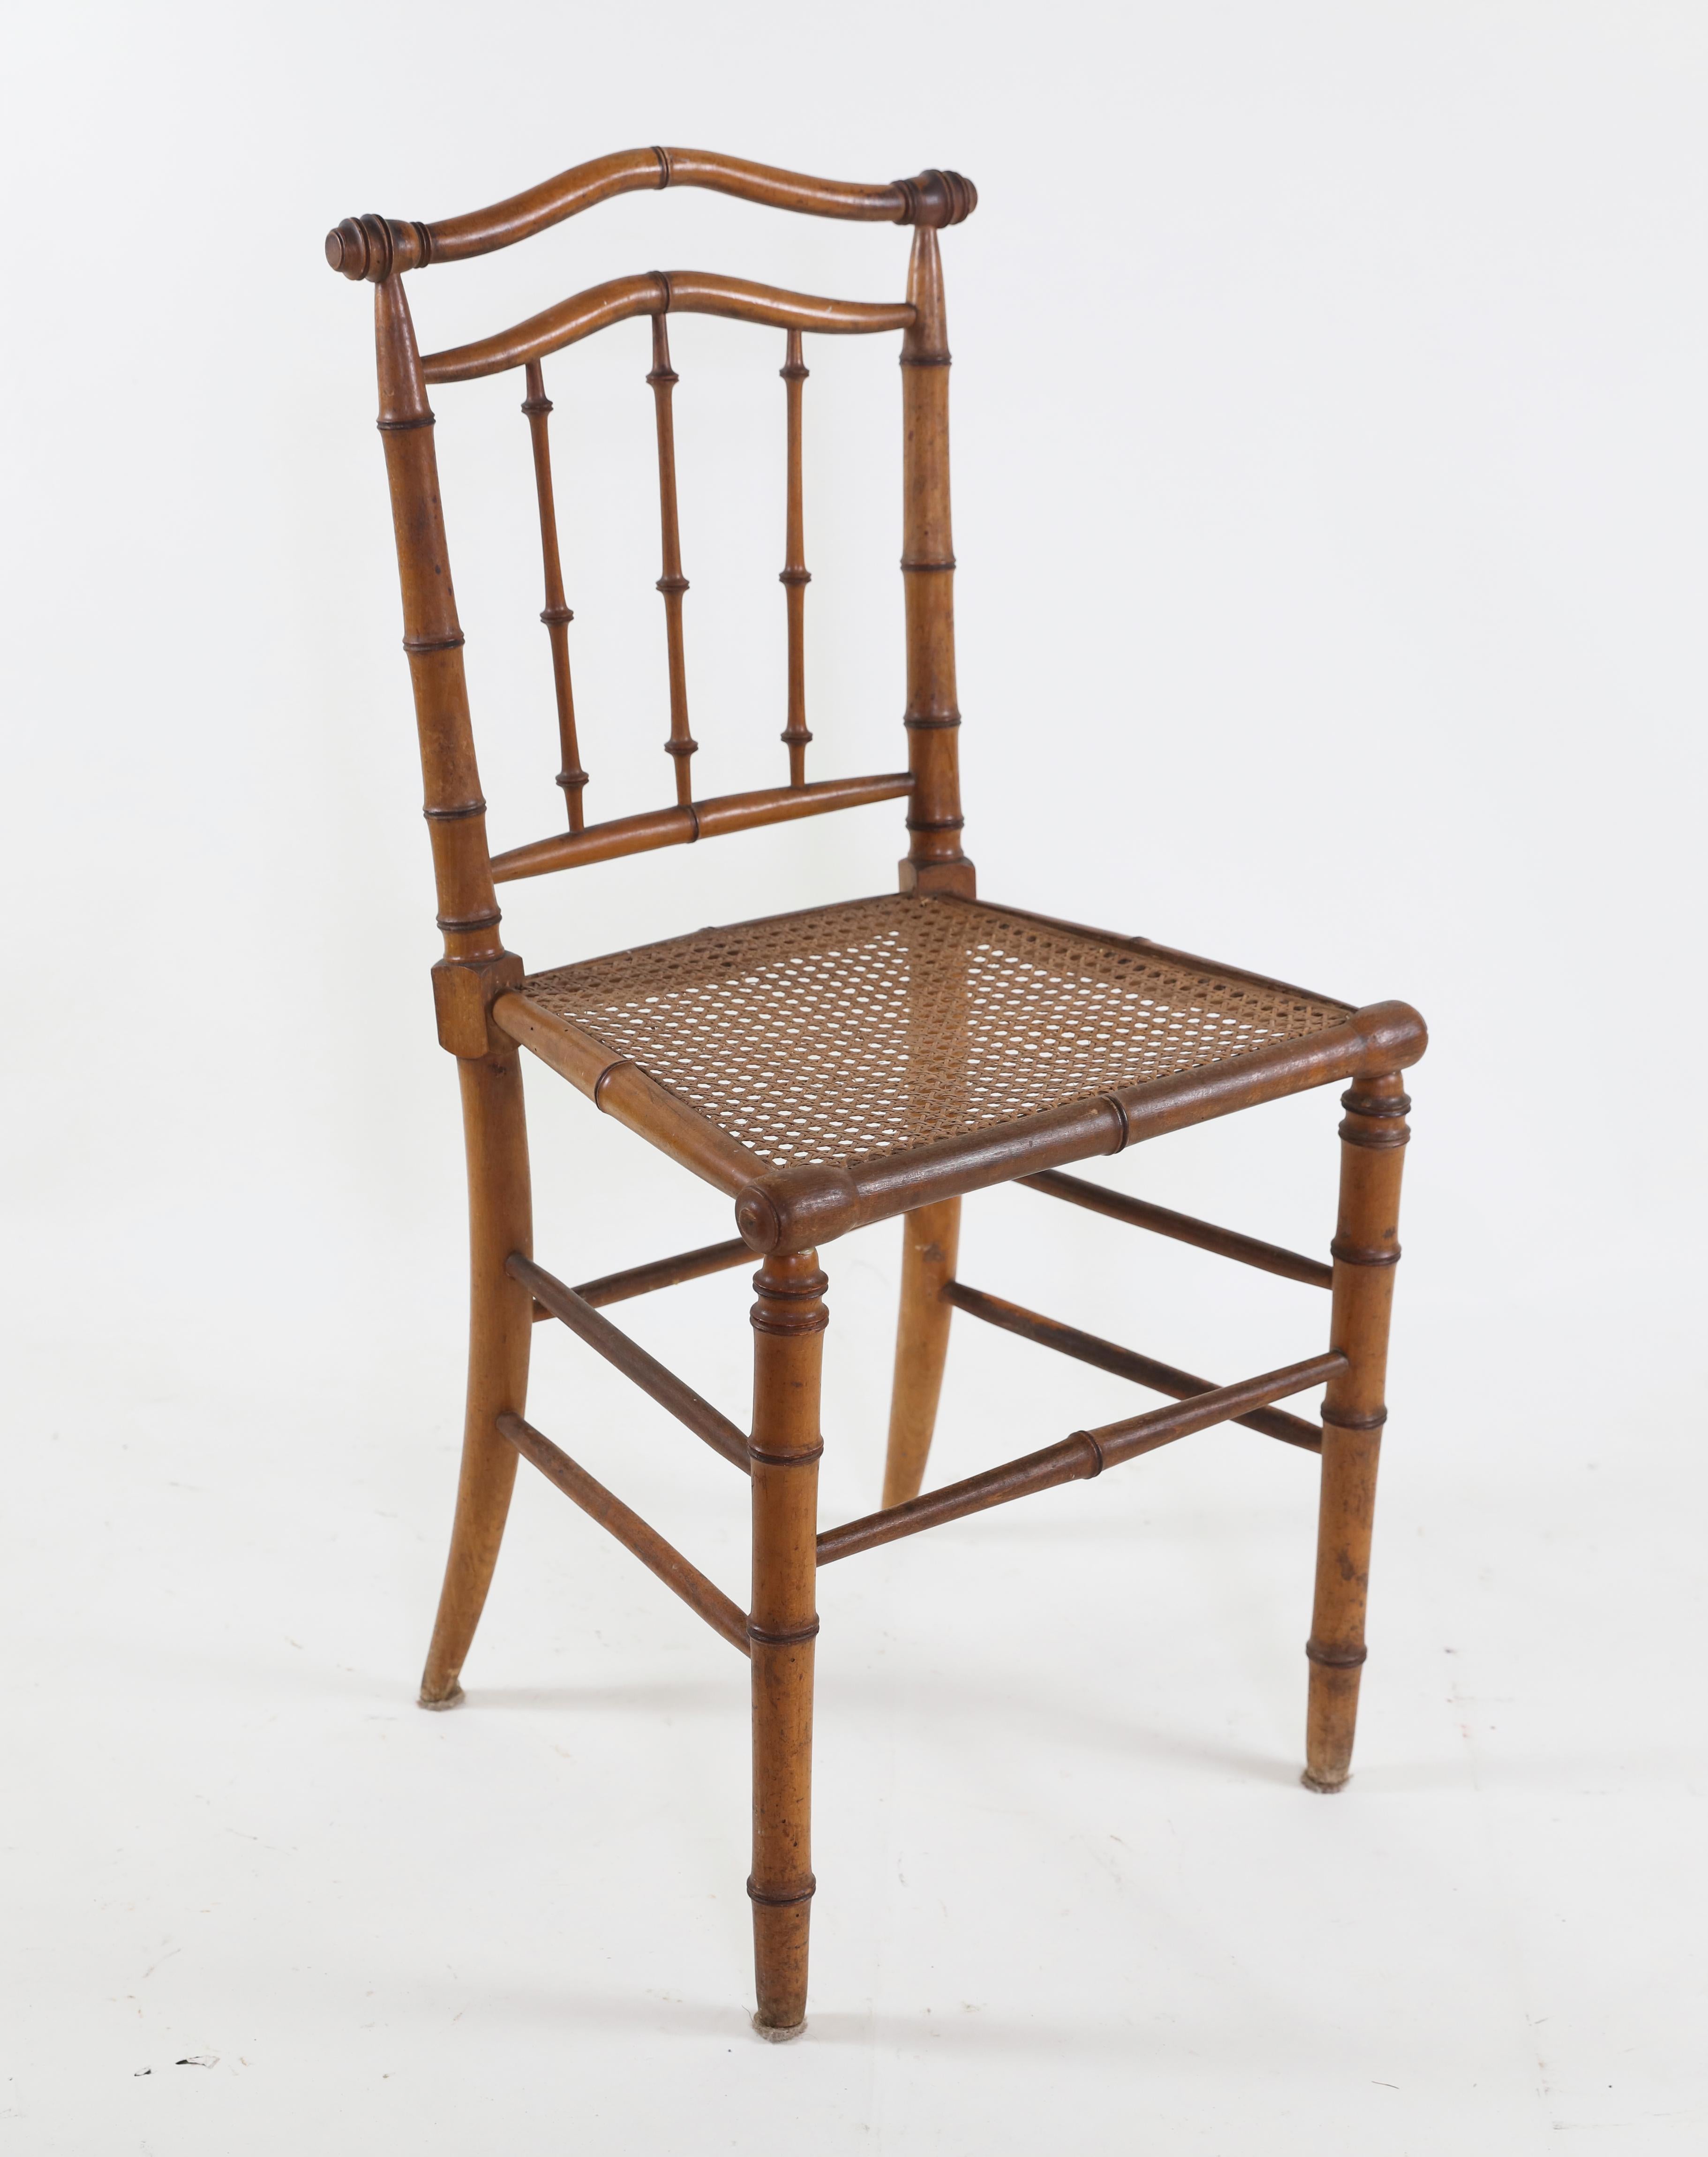 Women's or Men's Antique Bamboo Chairs (4)